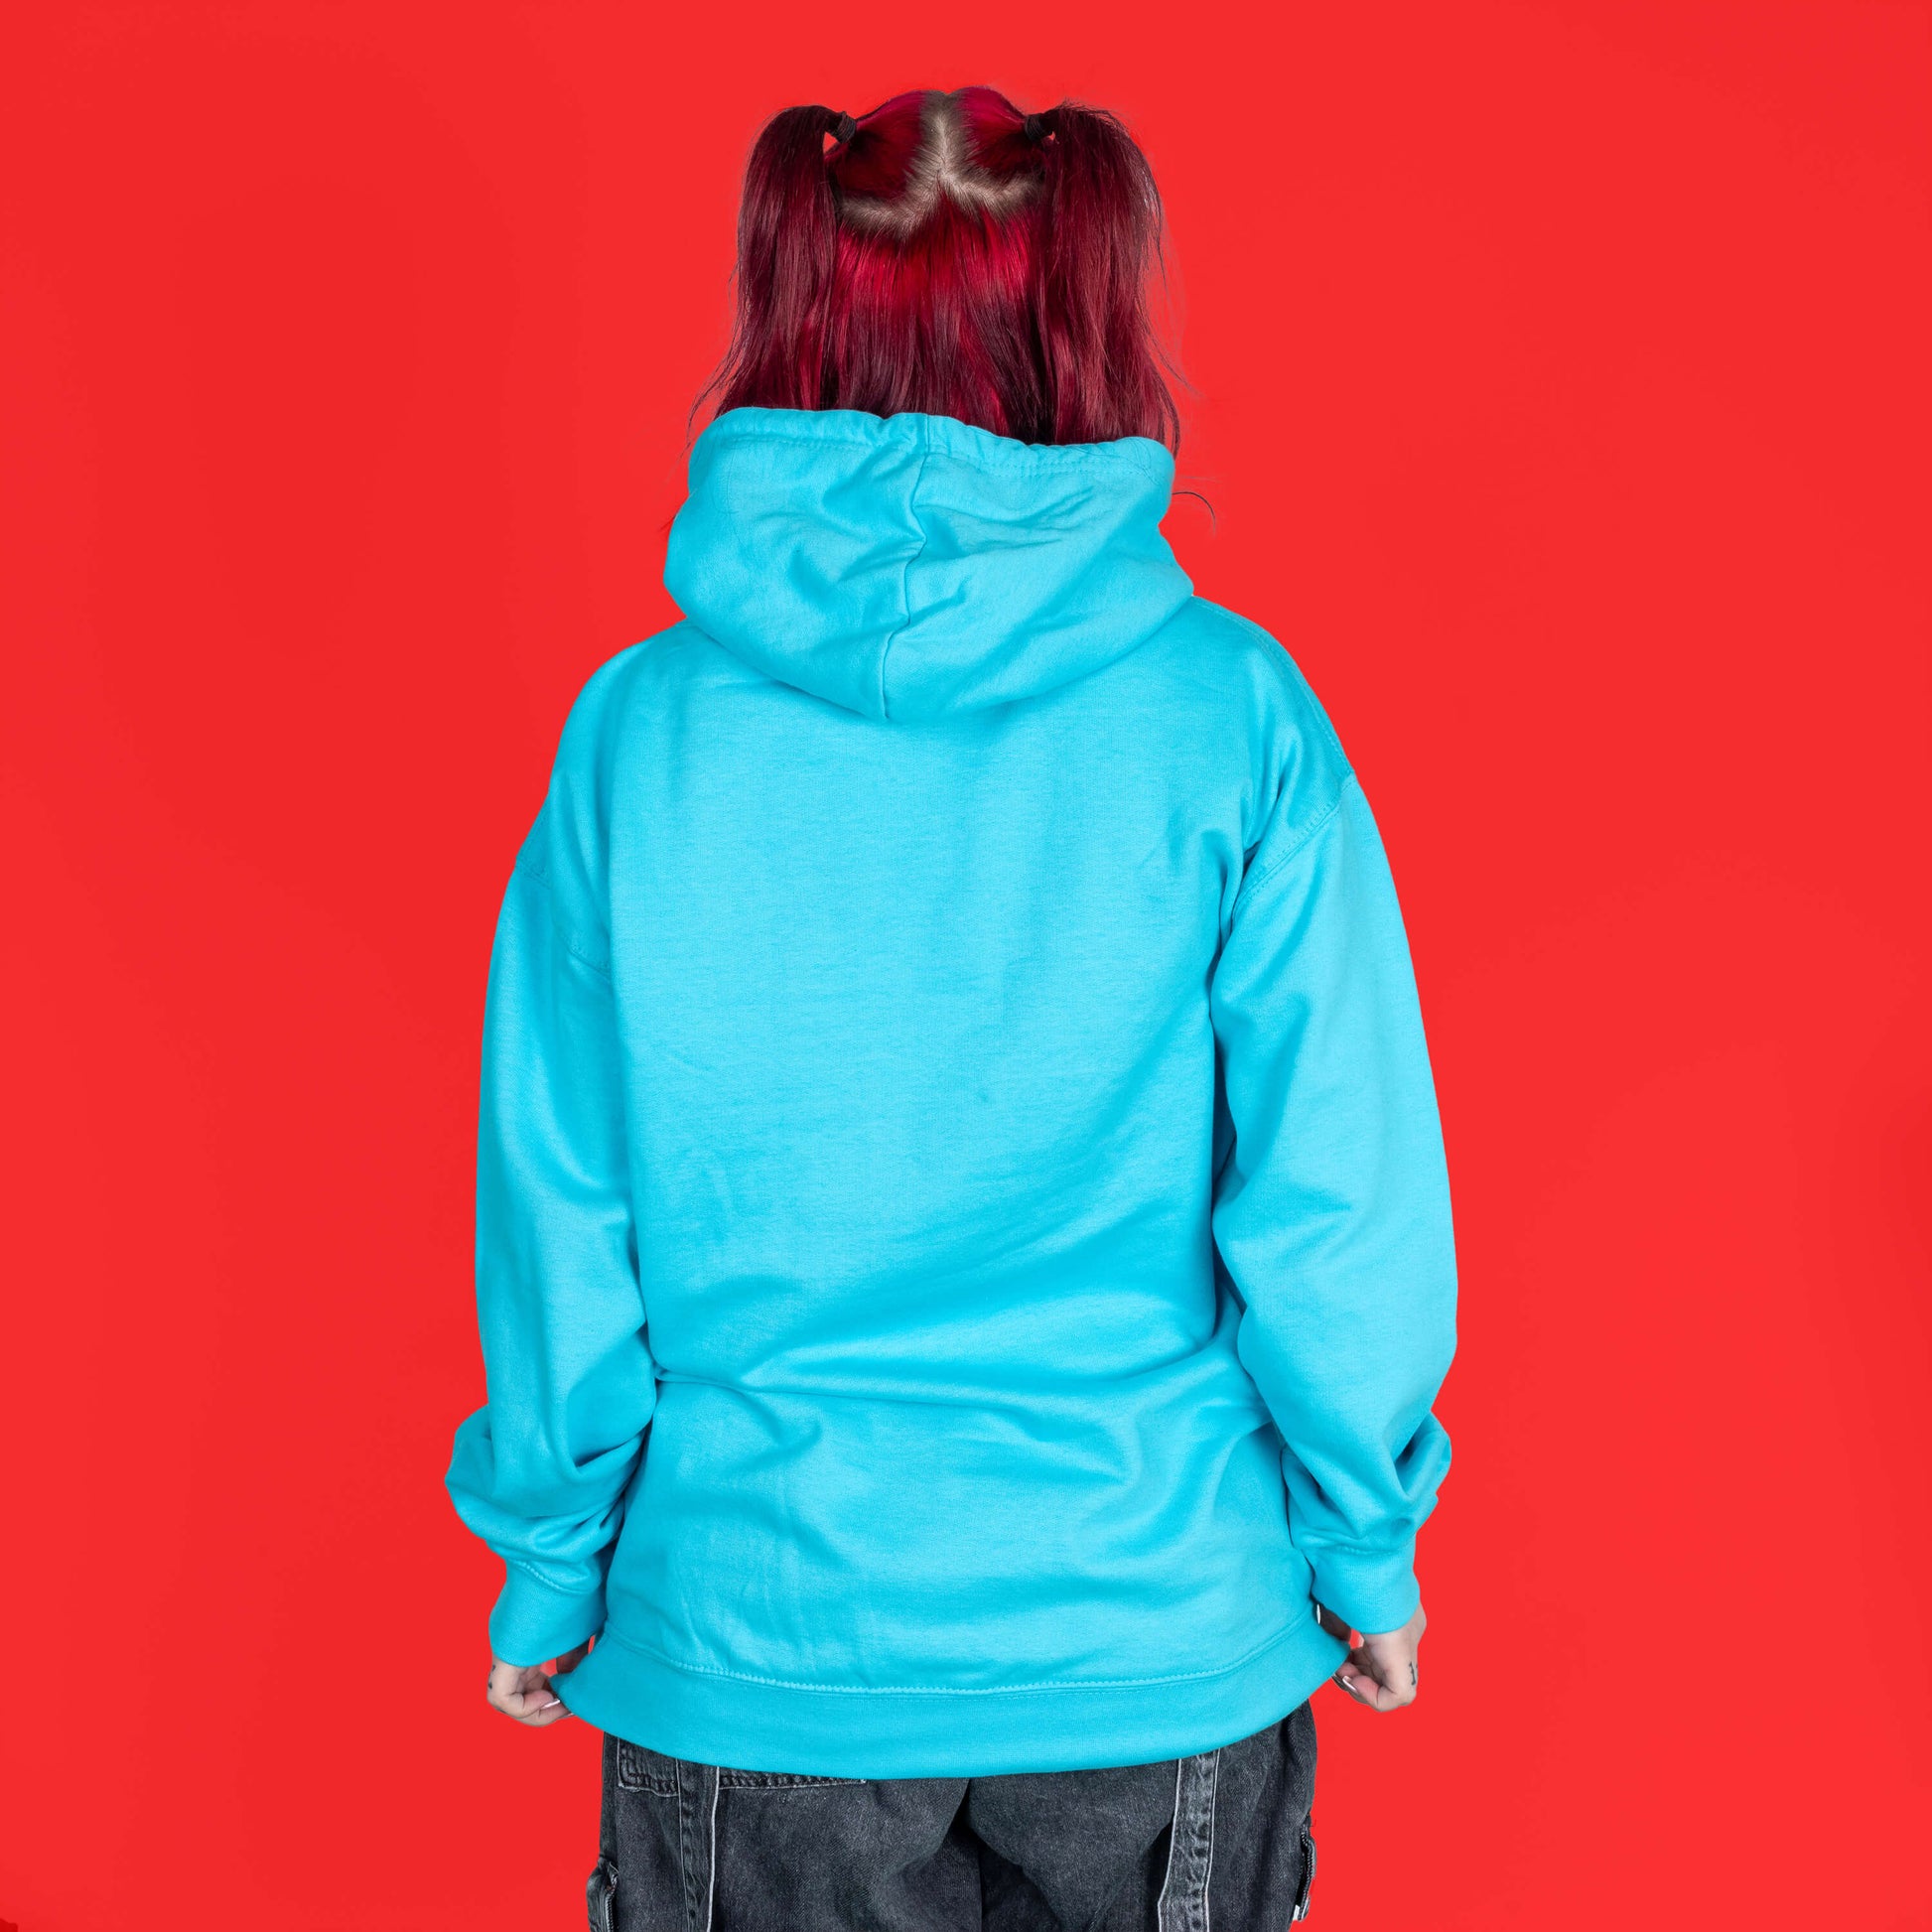 The Masking Is My Super Power Hoodie in Turquoise Surf modelled by Flo with red hair on a red background. She is facing away to highlight the plain back of the hoodie. The front of the aqua blue hoodie features pastel rainbow bubble writing that reads 'masking is my superpower' with white sparkles, a happy and sad drama masks all on a black oval. Raising awareness for neurodivergent people with ADHD or Autism.